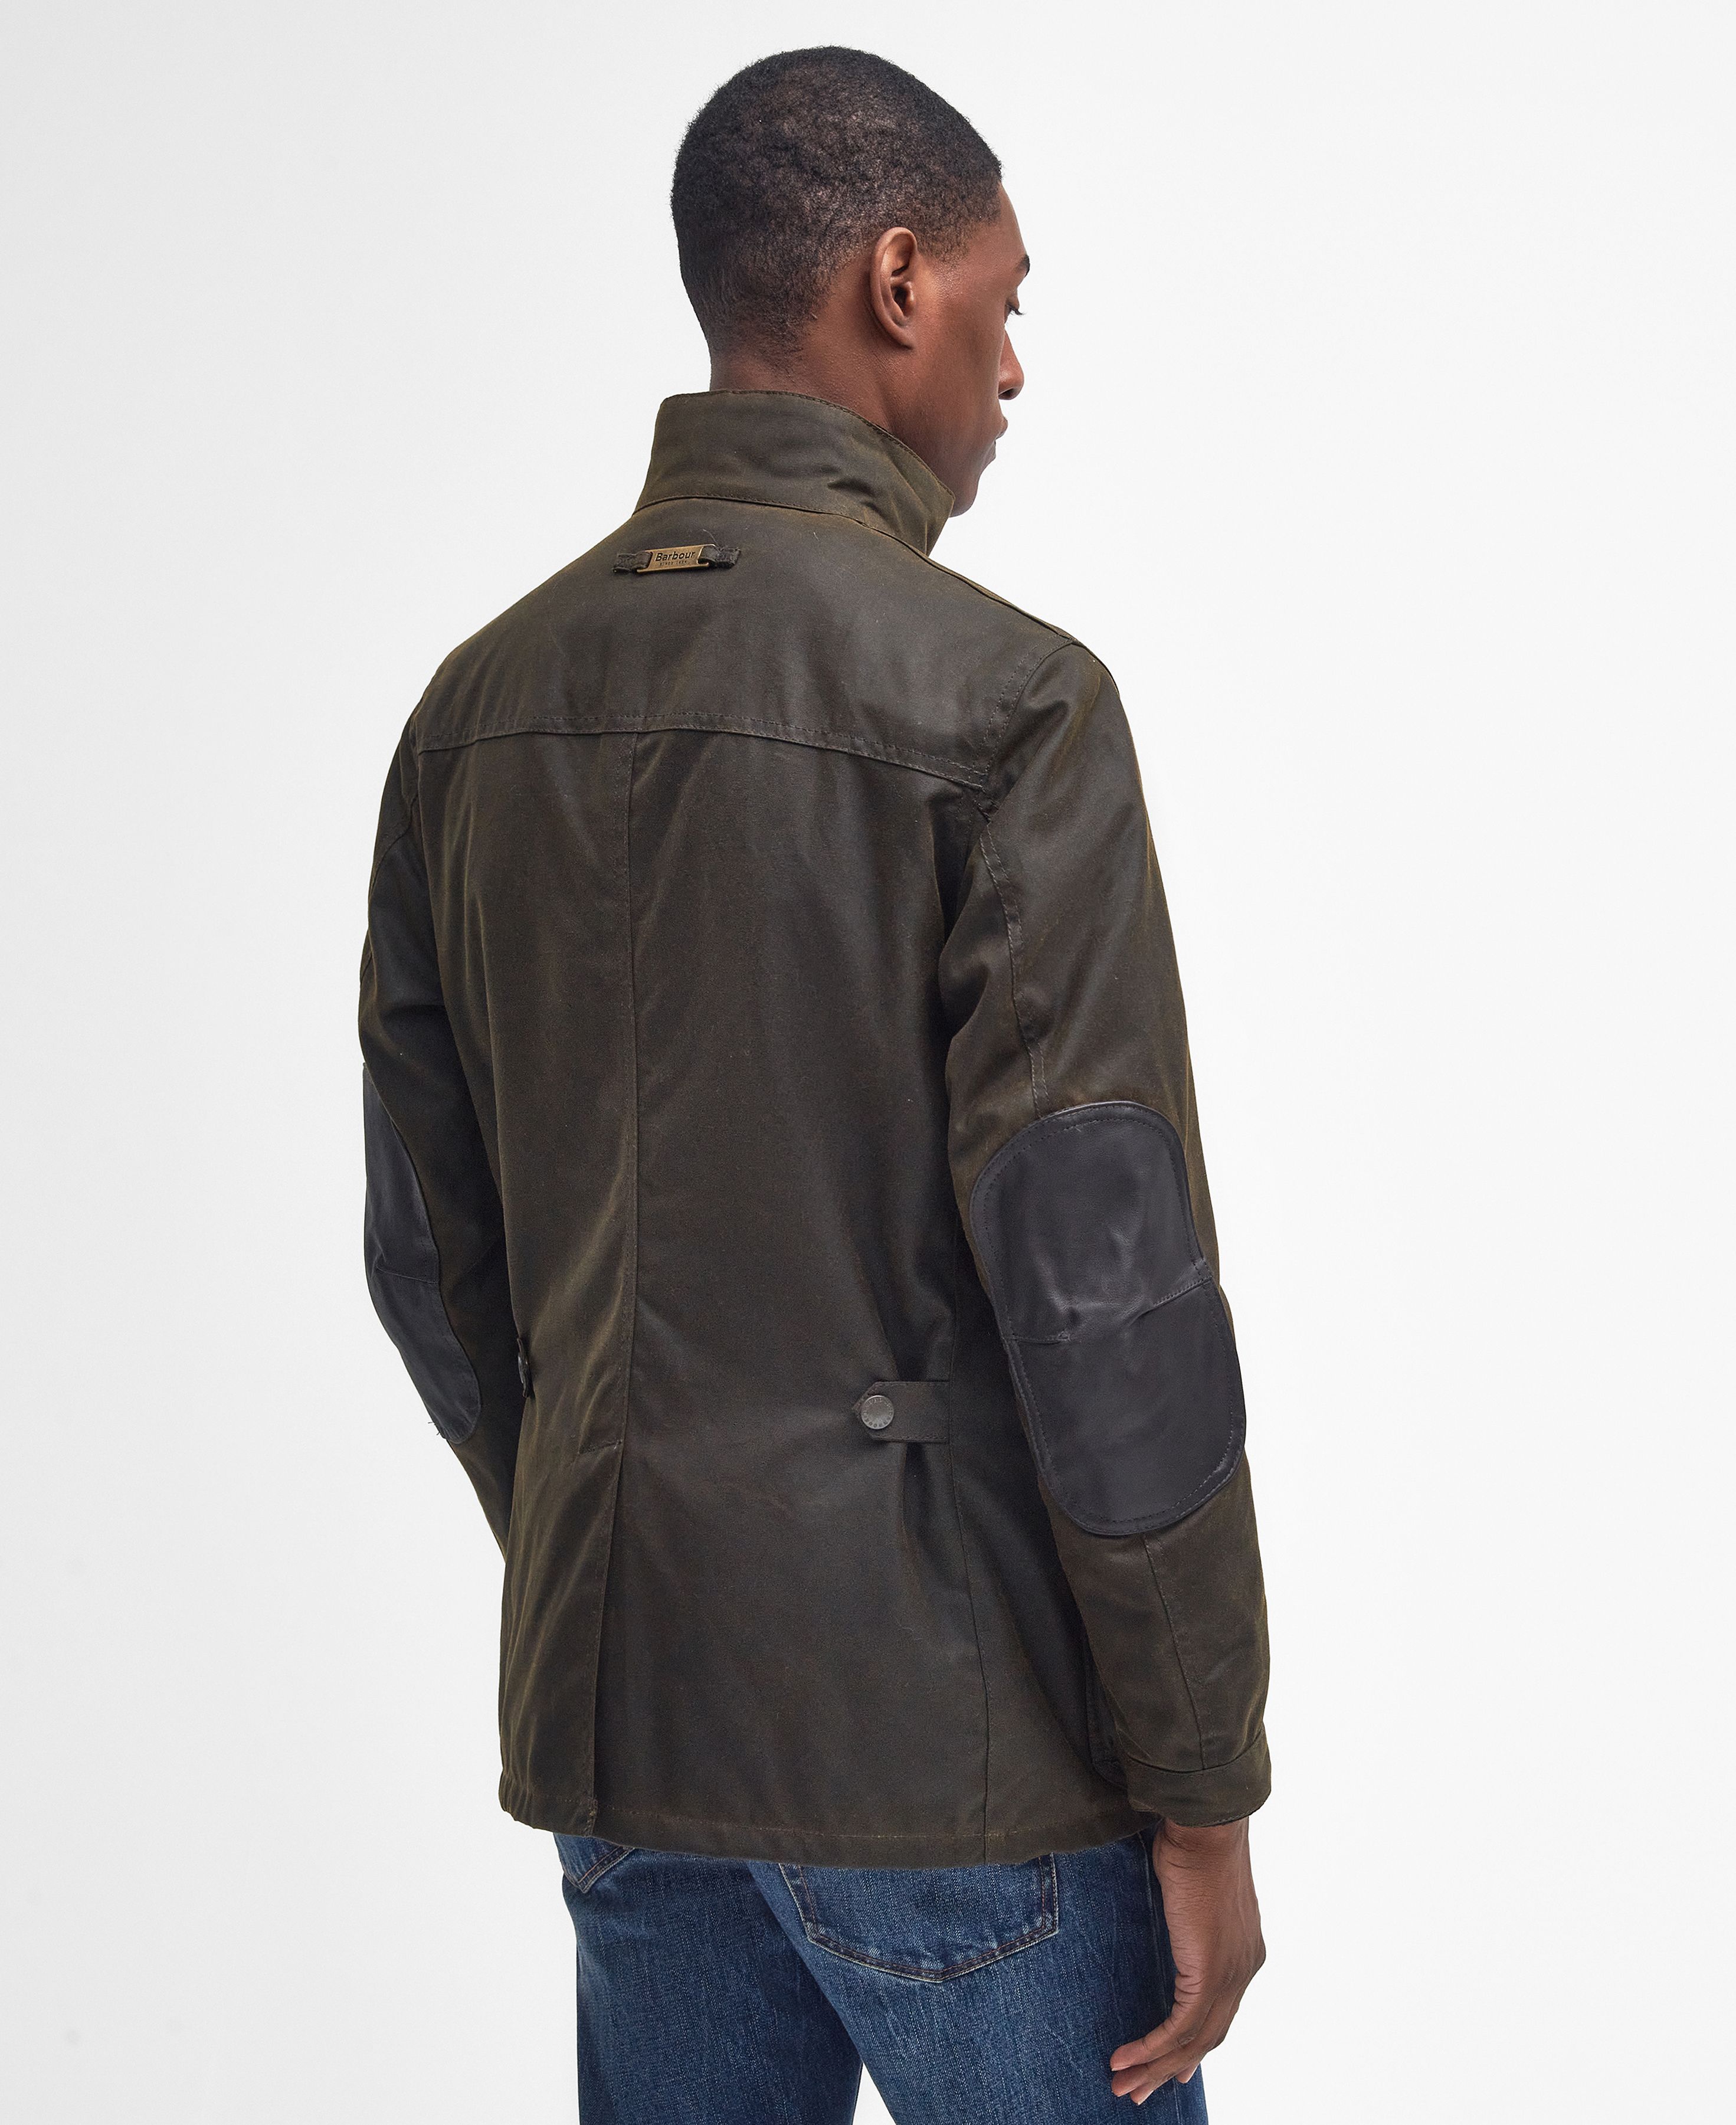 Barbour Ogston Wax Jacket in Olive | Barbour